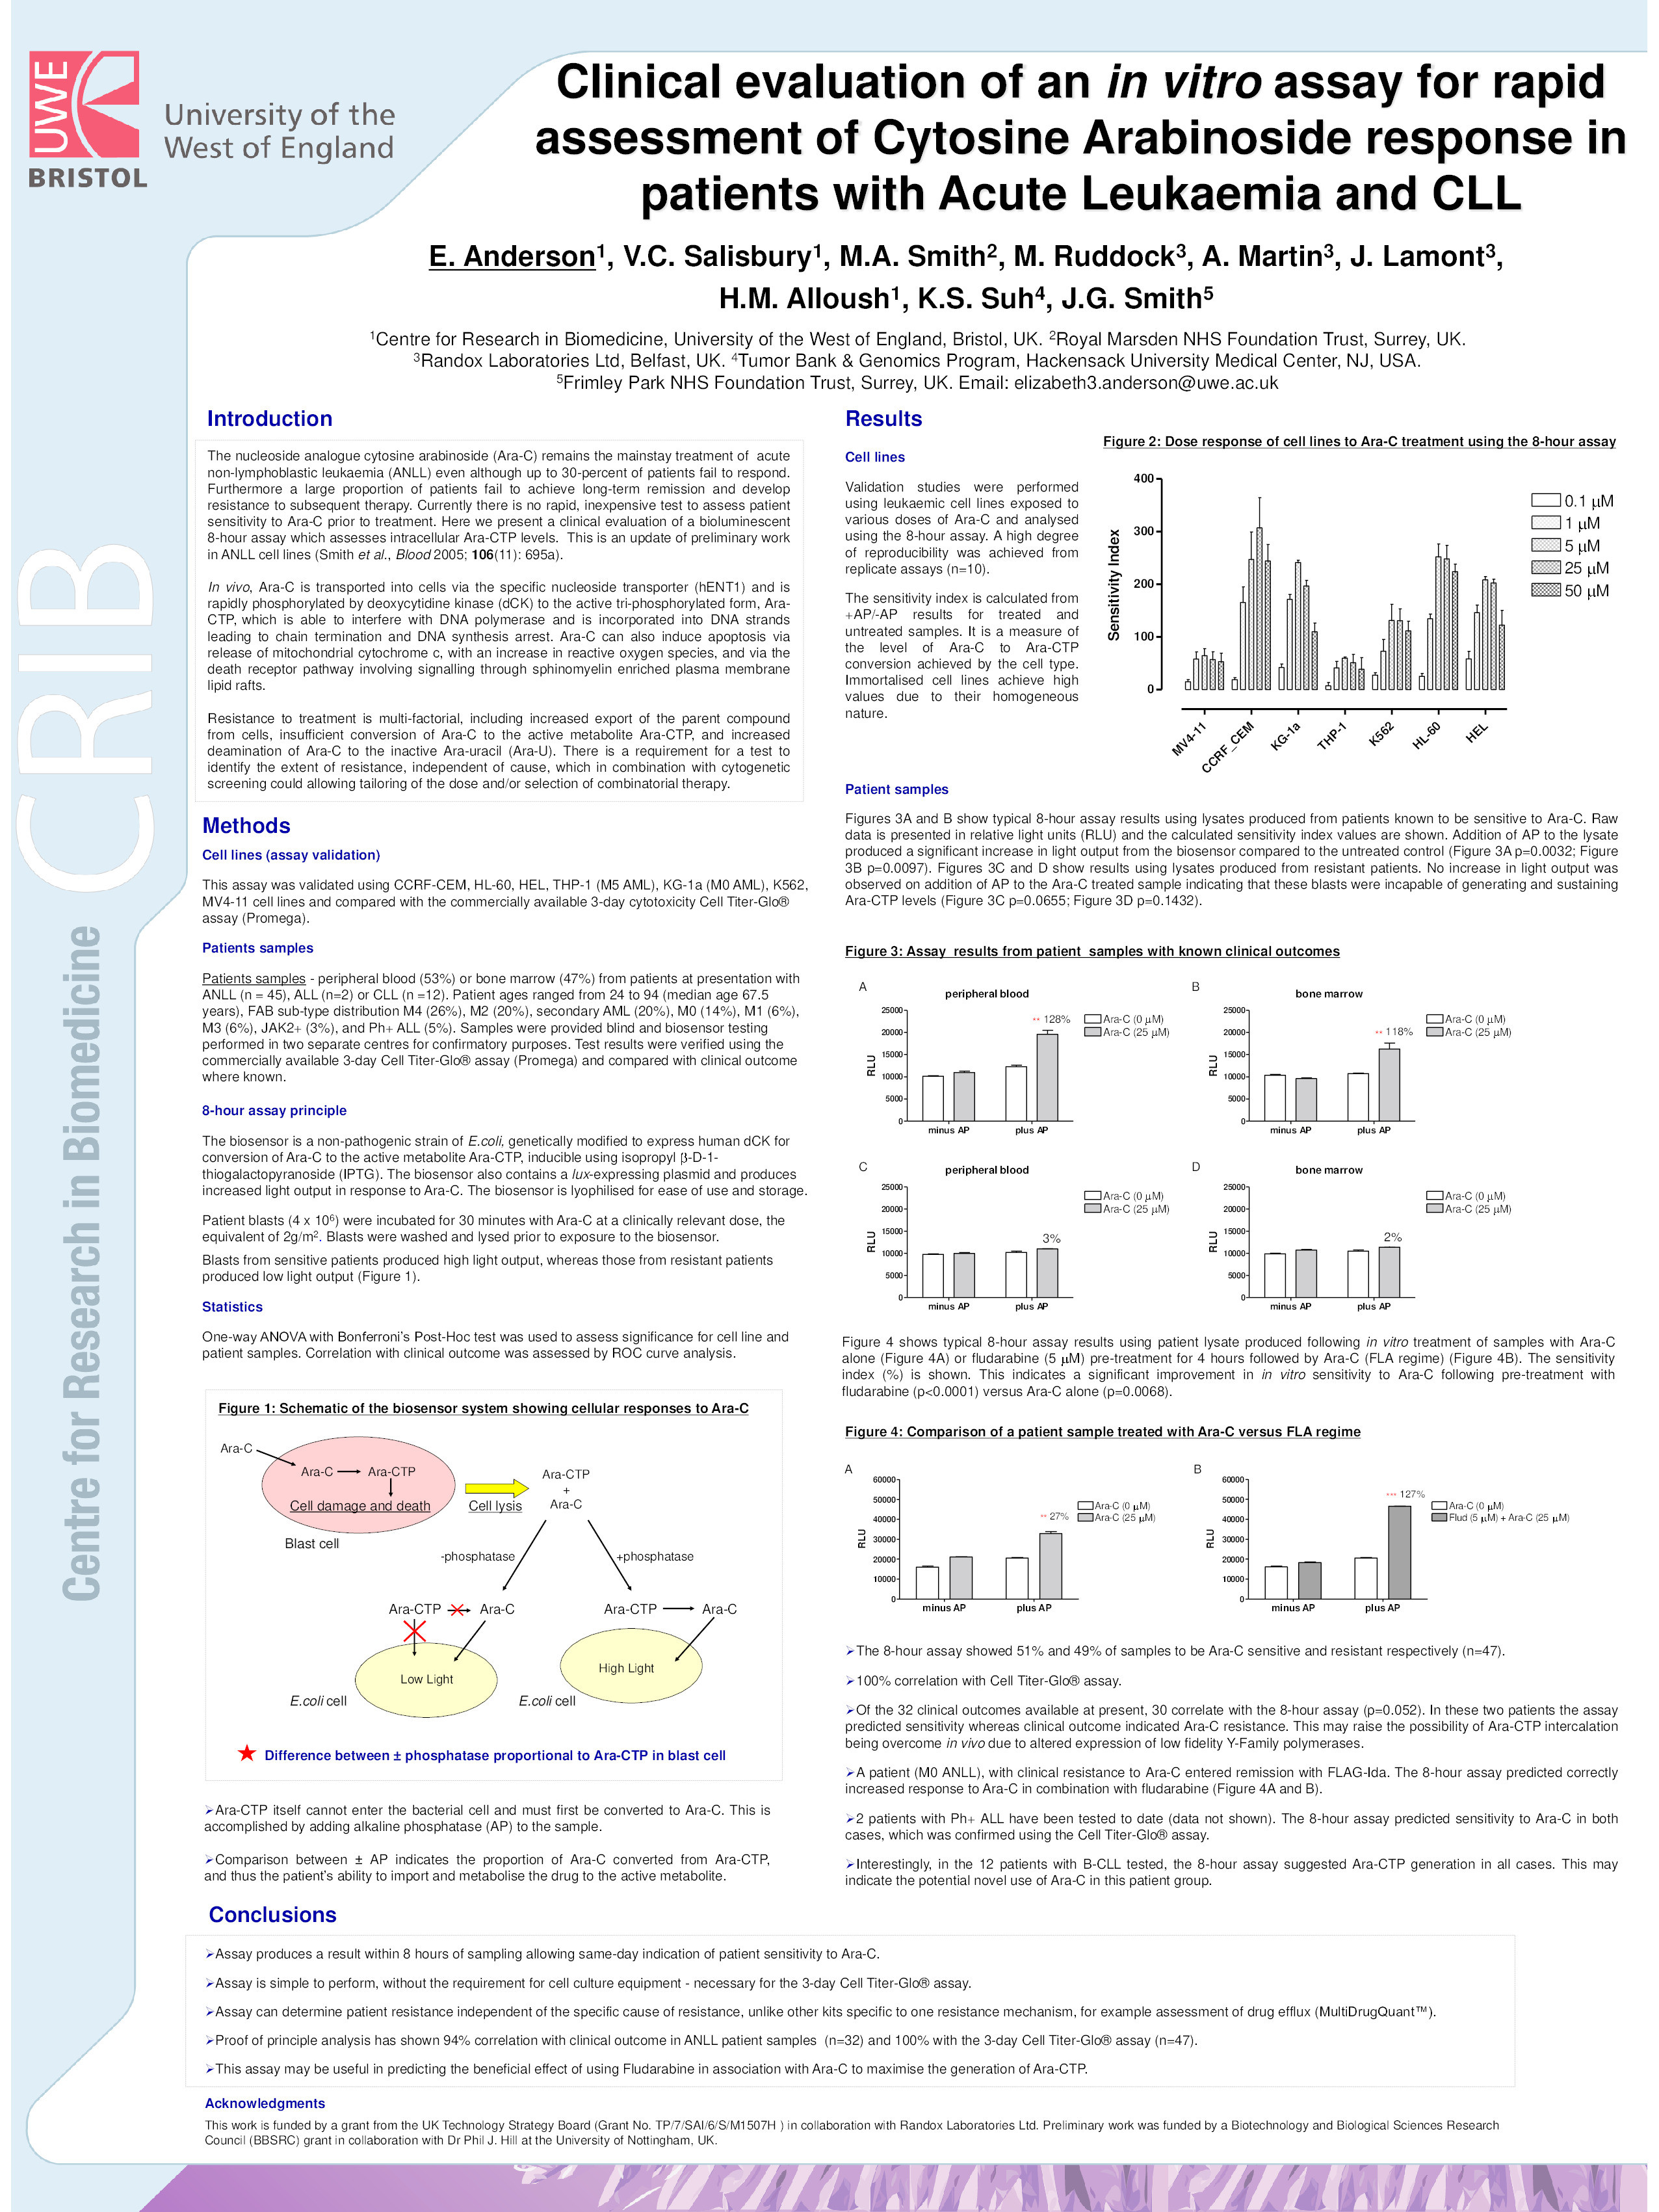 Clinical evaluation of an in vitro assay for rapid assessment of cytosine arabinoside response in patients with acute leukaemia and CLL Thumbnail